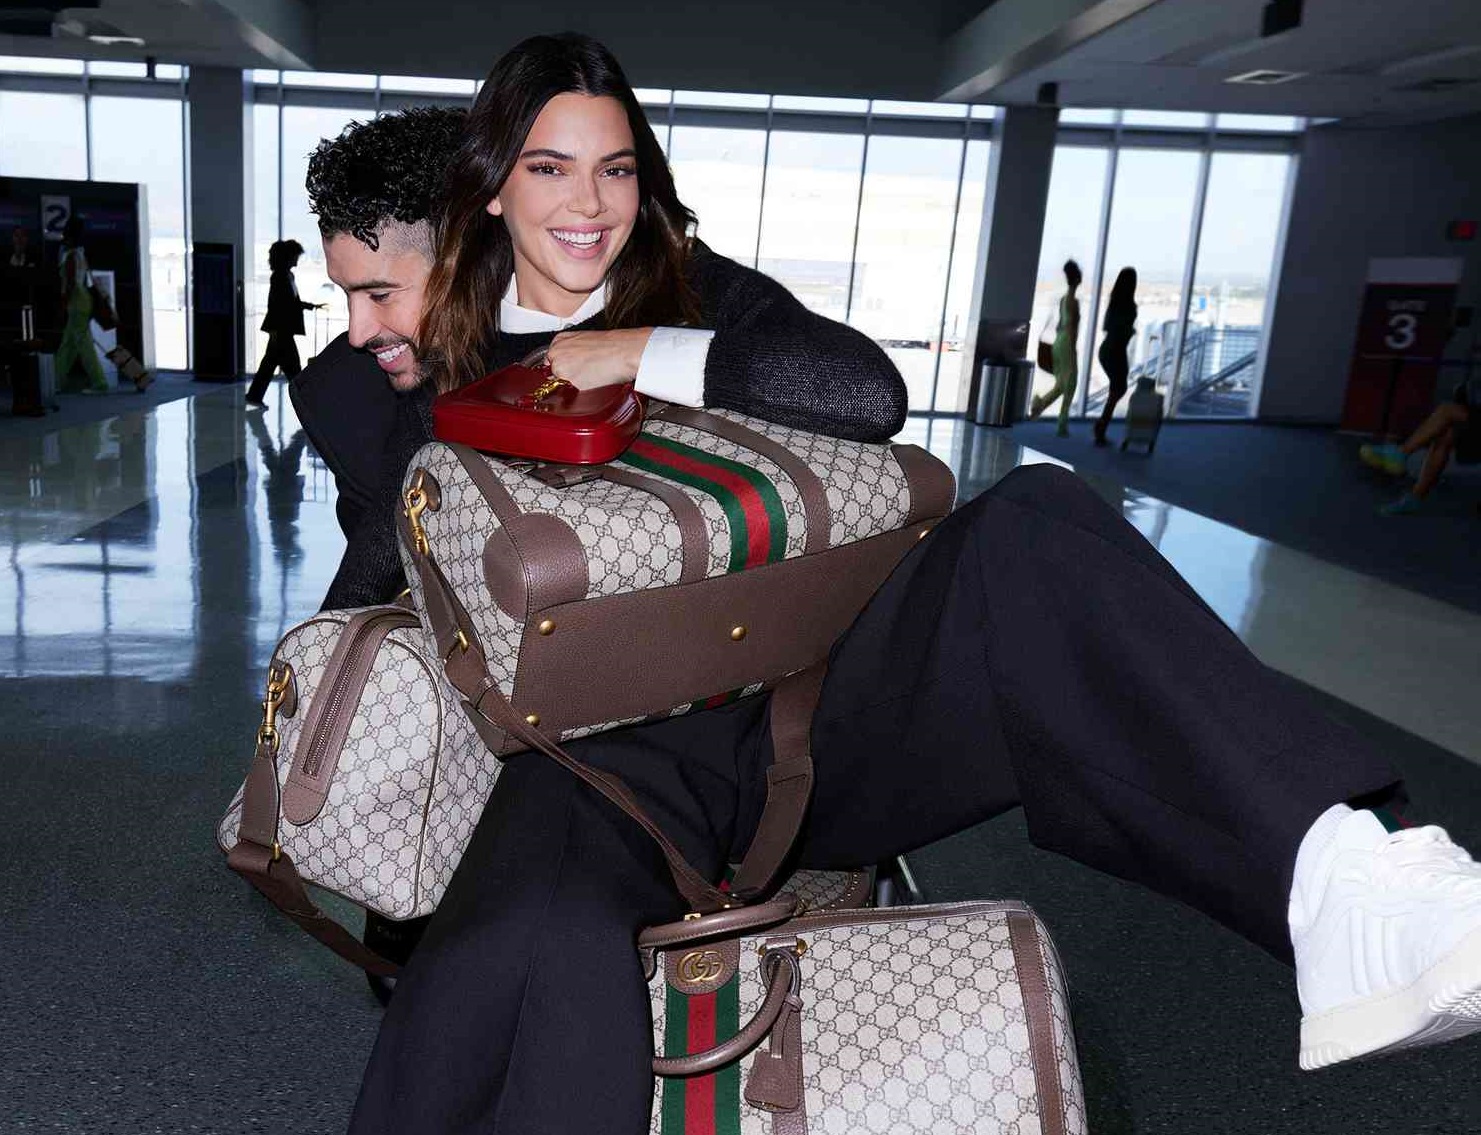 Gucci’s Jet-Set Love Affair: Kendall Jenner and Bad Bunny Take Flight